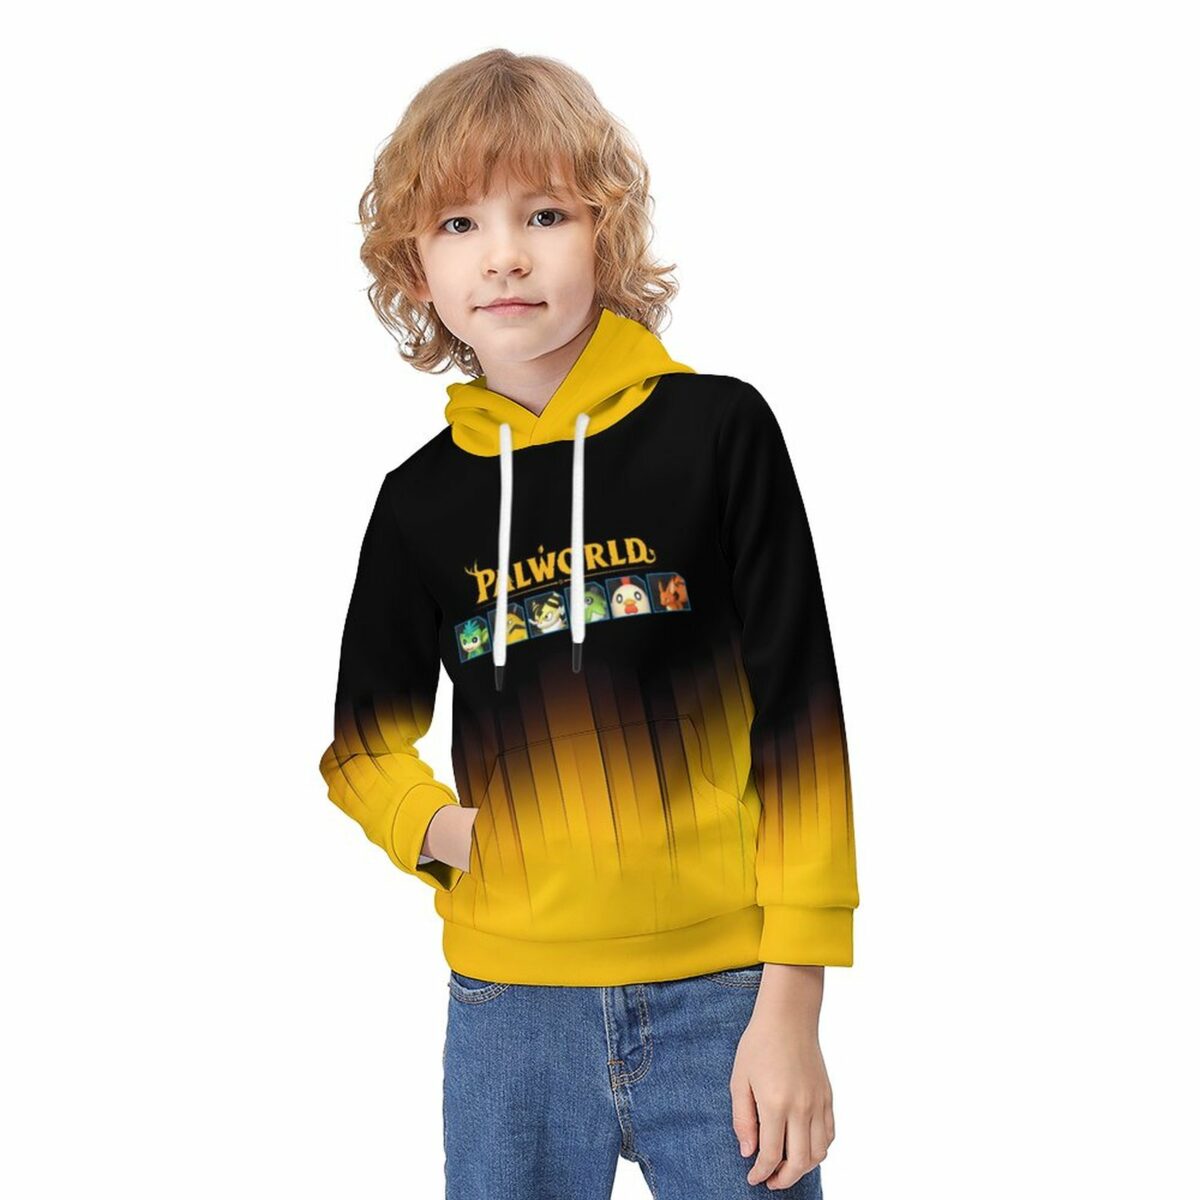 Palworld Black and Yellow 230gsm Hoodie for Kids (All-Over Printing) Cool Kiddo 12